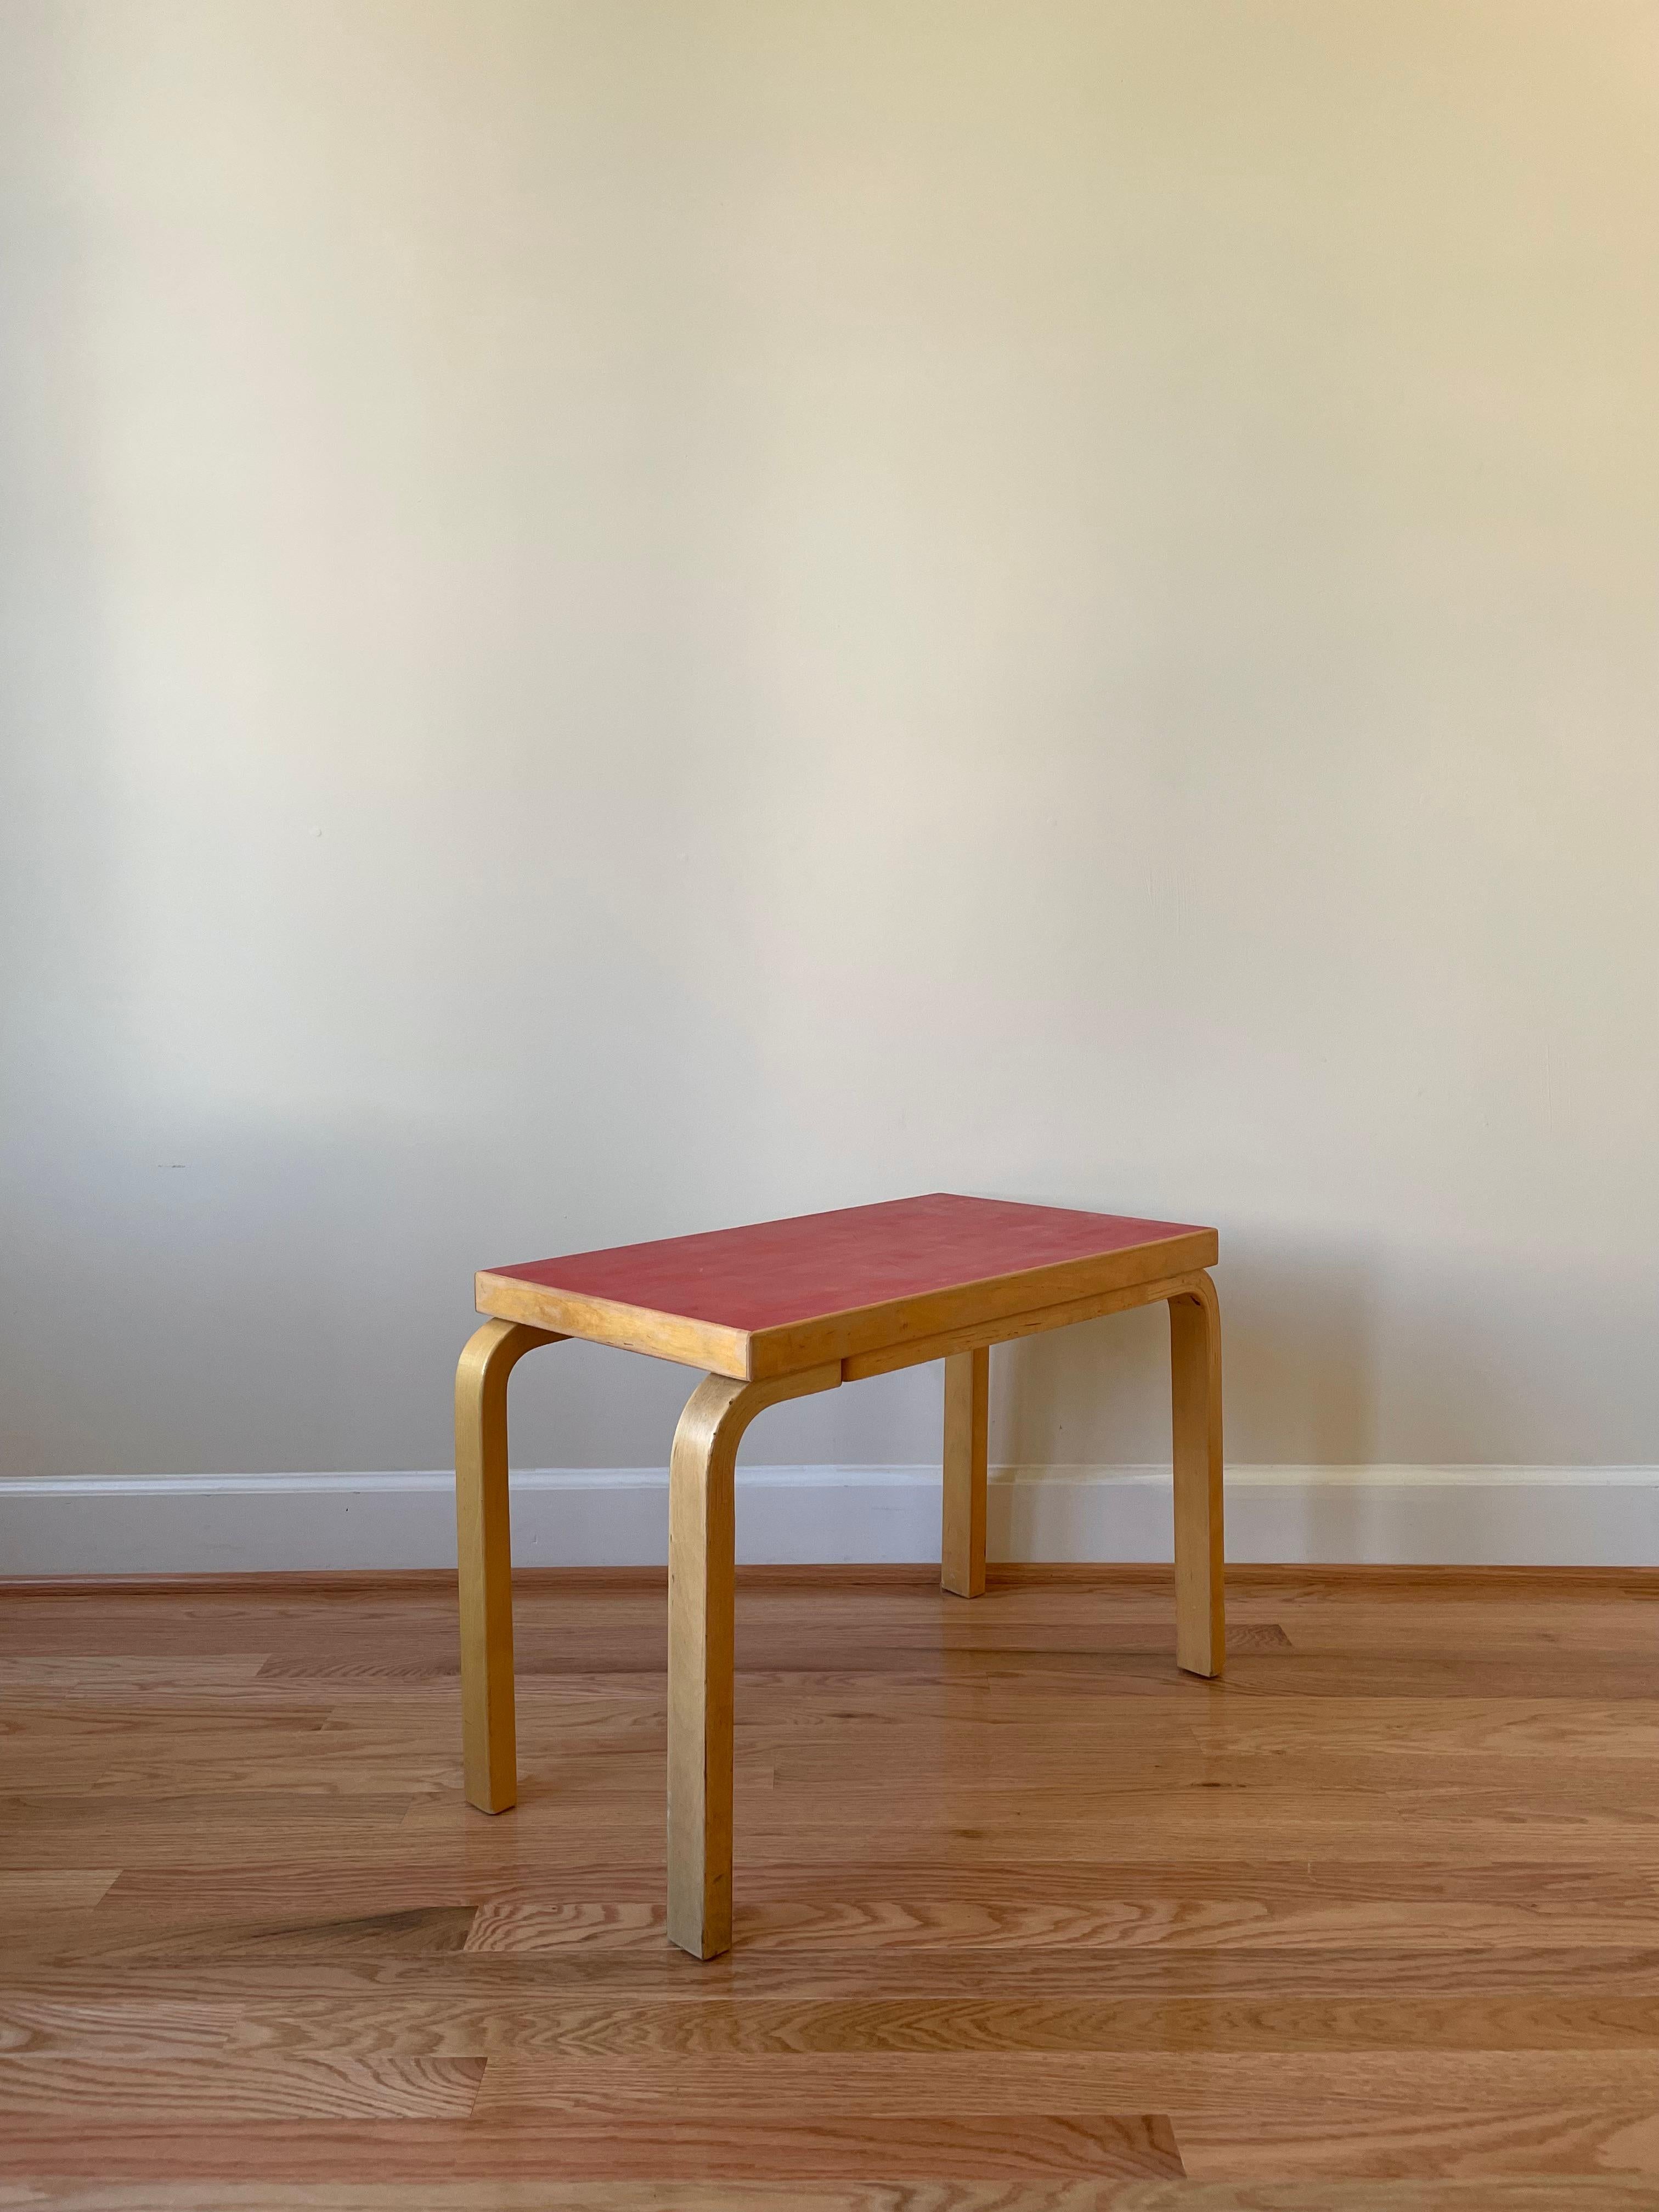 This rectangular, low table conveys a relaxed familiarity that resists categorization. In accordance with Alvar Aalto’s conception of versatile furniture, it moves naturally between public and private spheres. The Finnish birch from which it is made